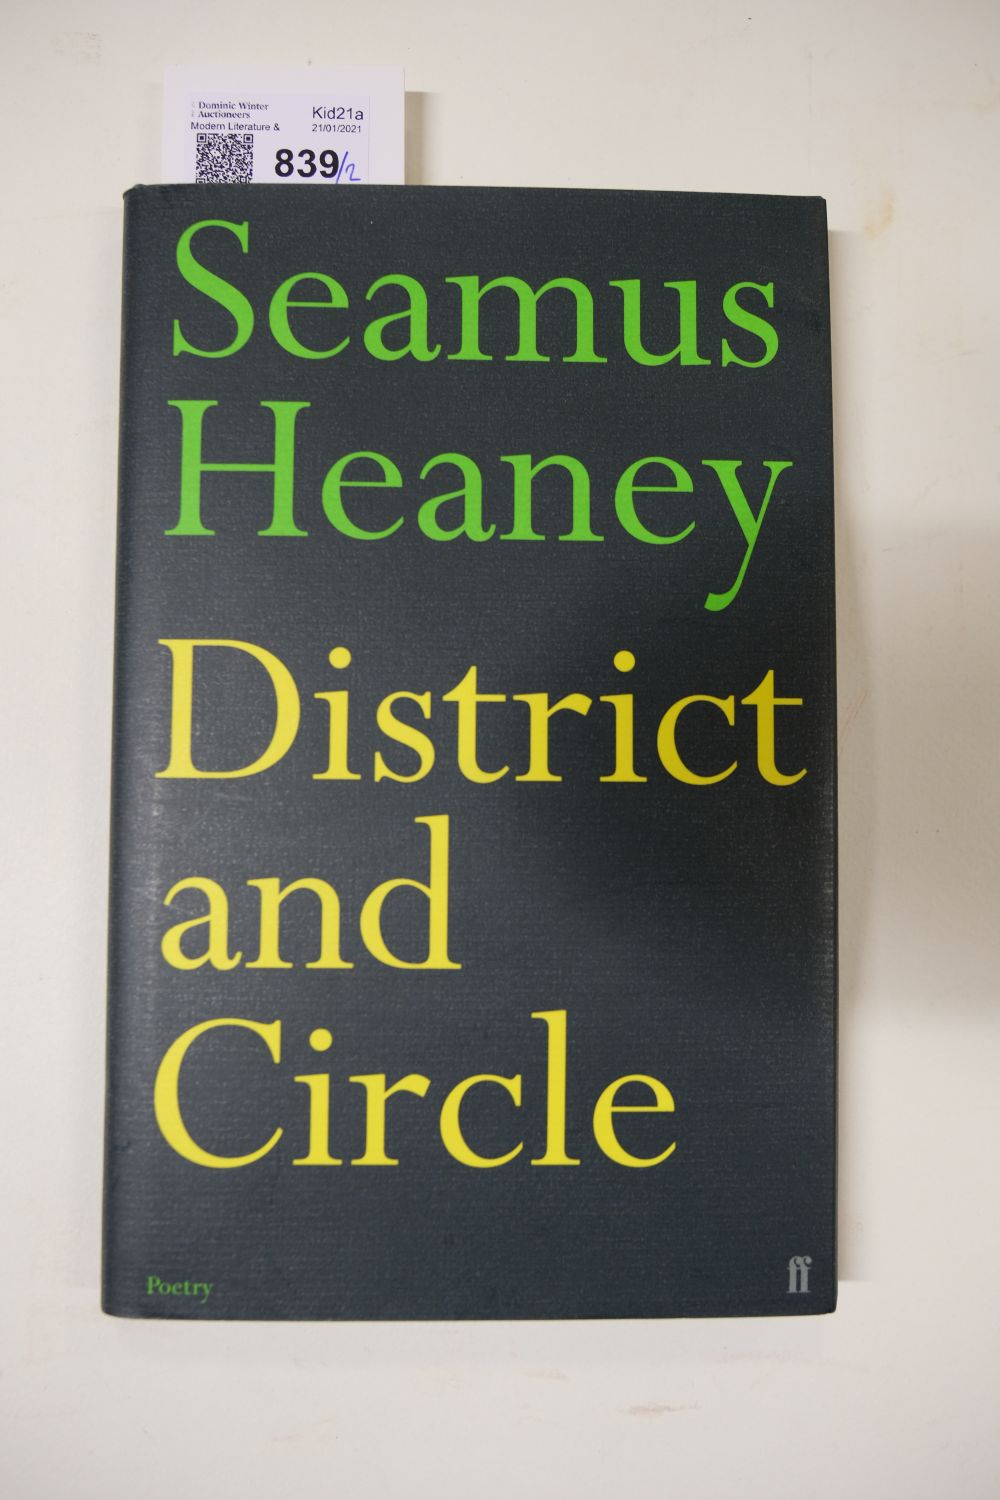 Heaney (Seamus). Beowulf, 1st edition, 1999